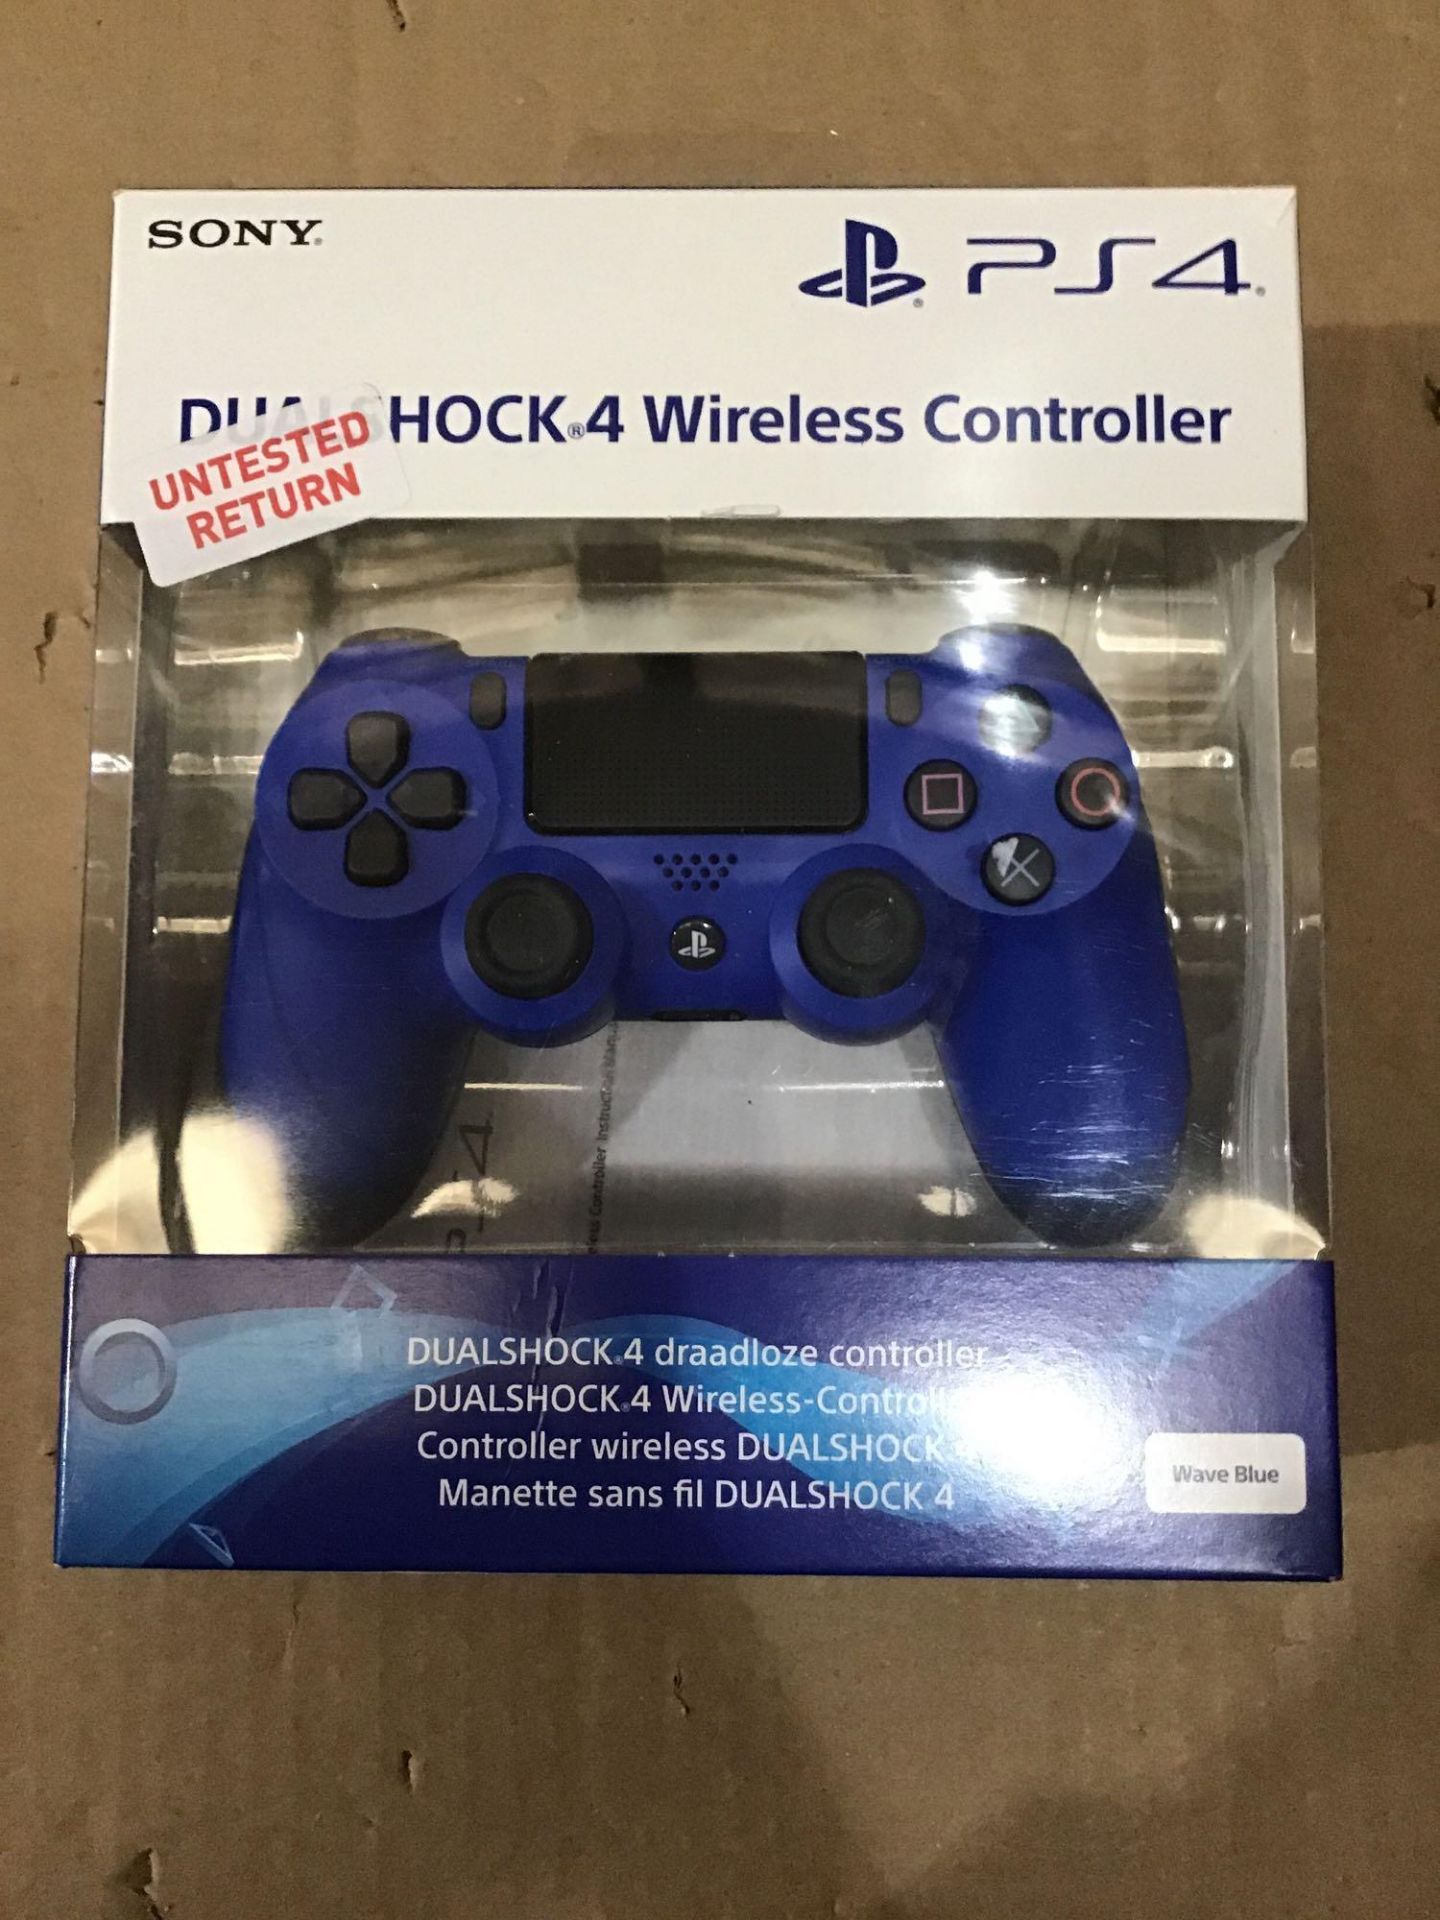 Sony PS4 DualShock 4 V2 Wireless Controller - Wave Blue - £49.99 RRP - Image 2 of 5